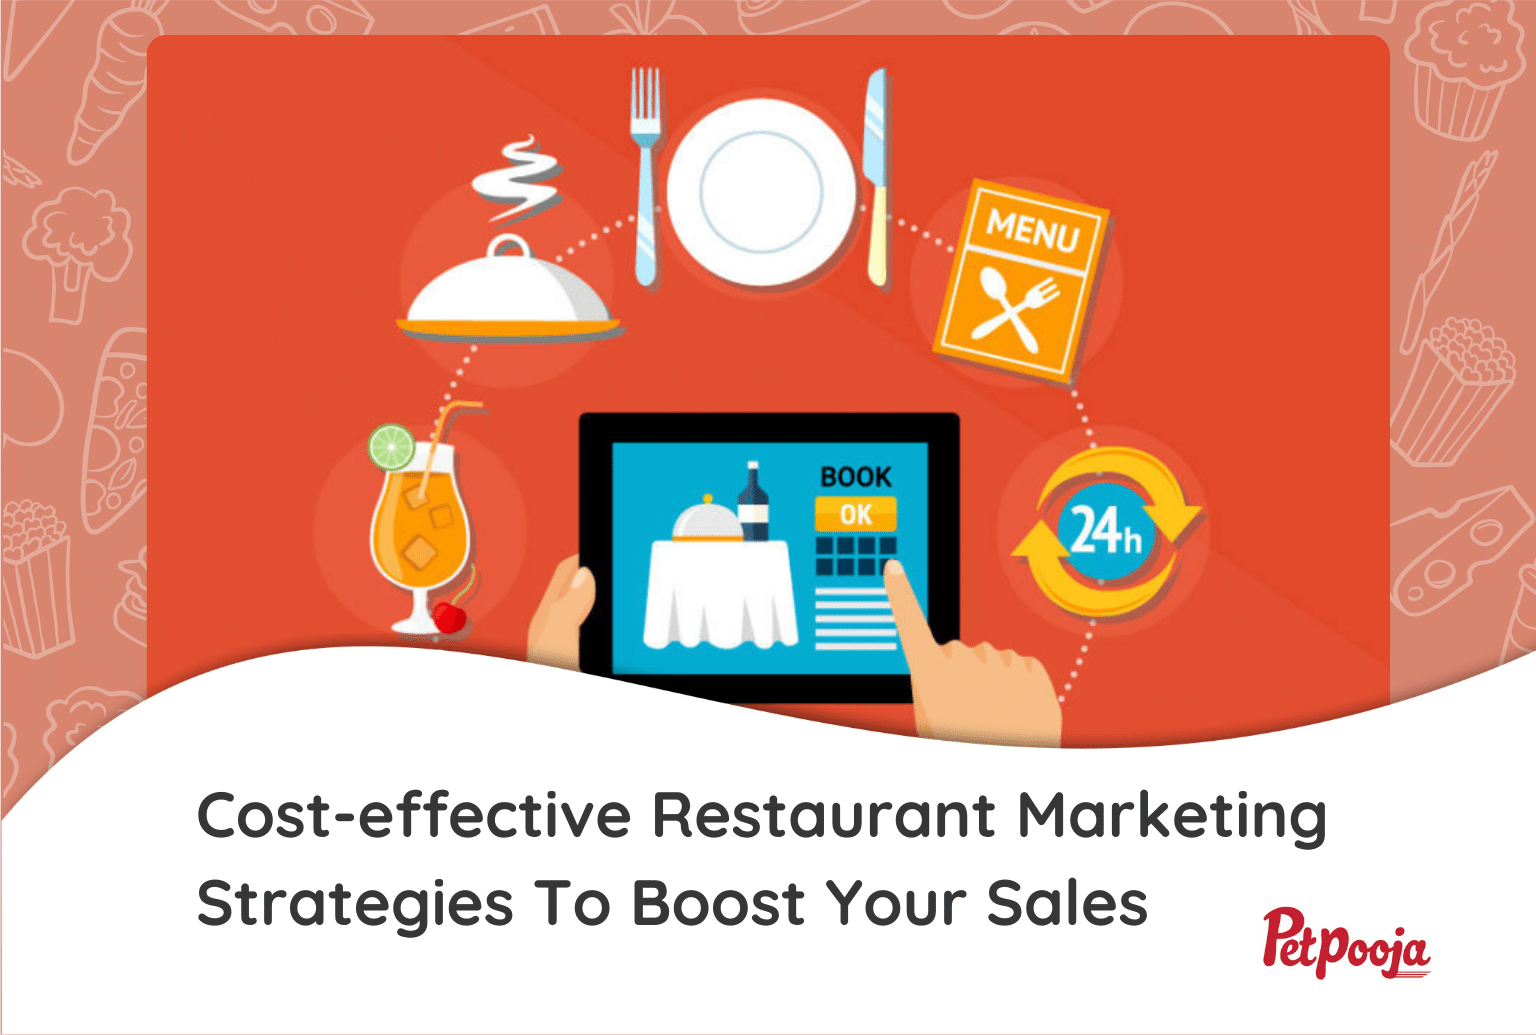 Restaurant Marketing ideas that are super cost-effective